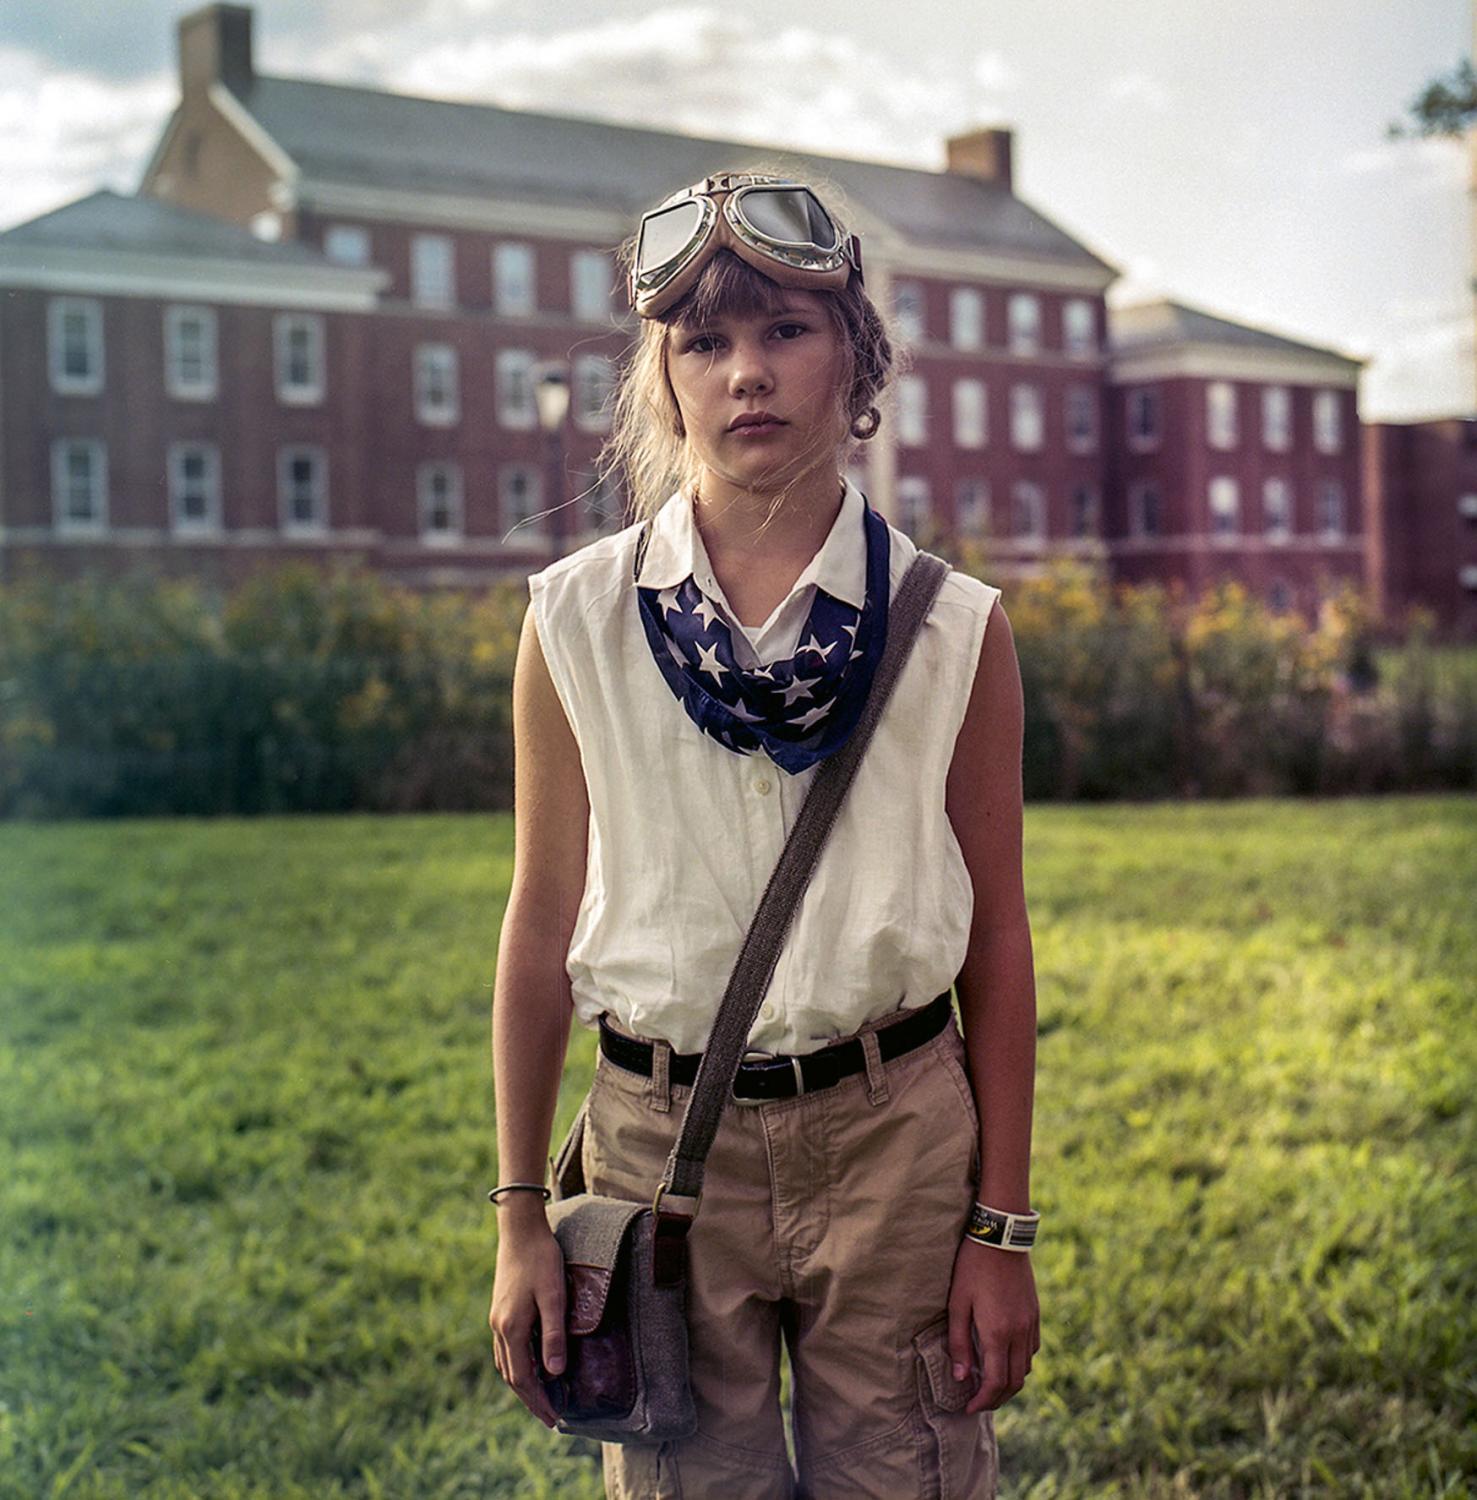 Faces of New York City  - Mylah as Amelia Earhart, Governor's Island, 2019.